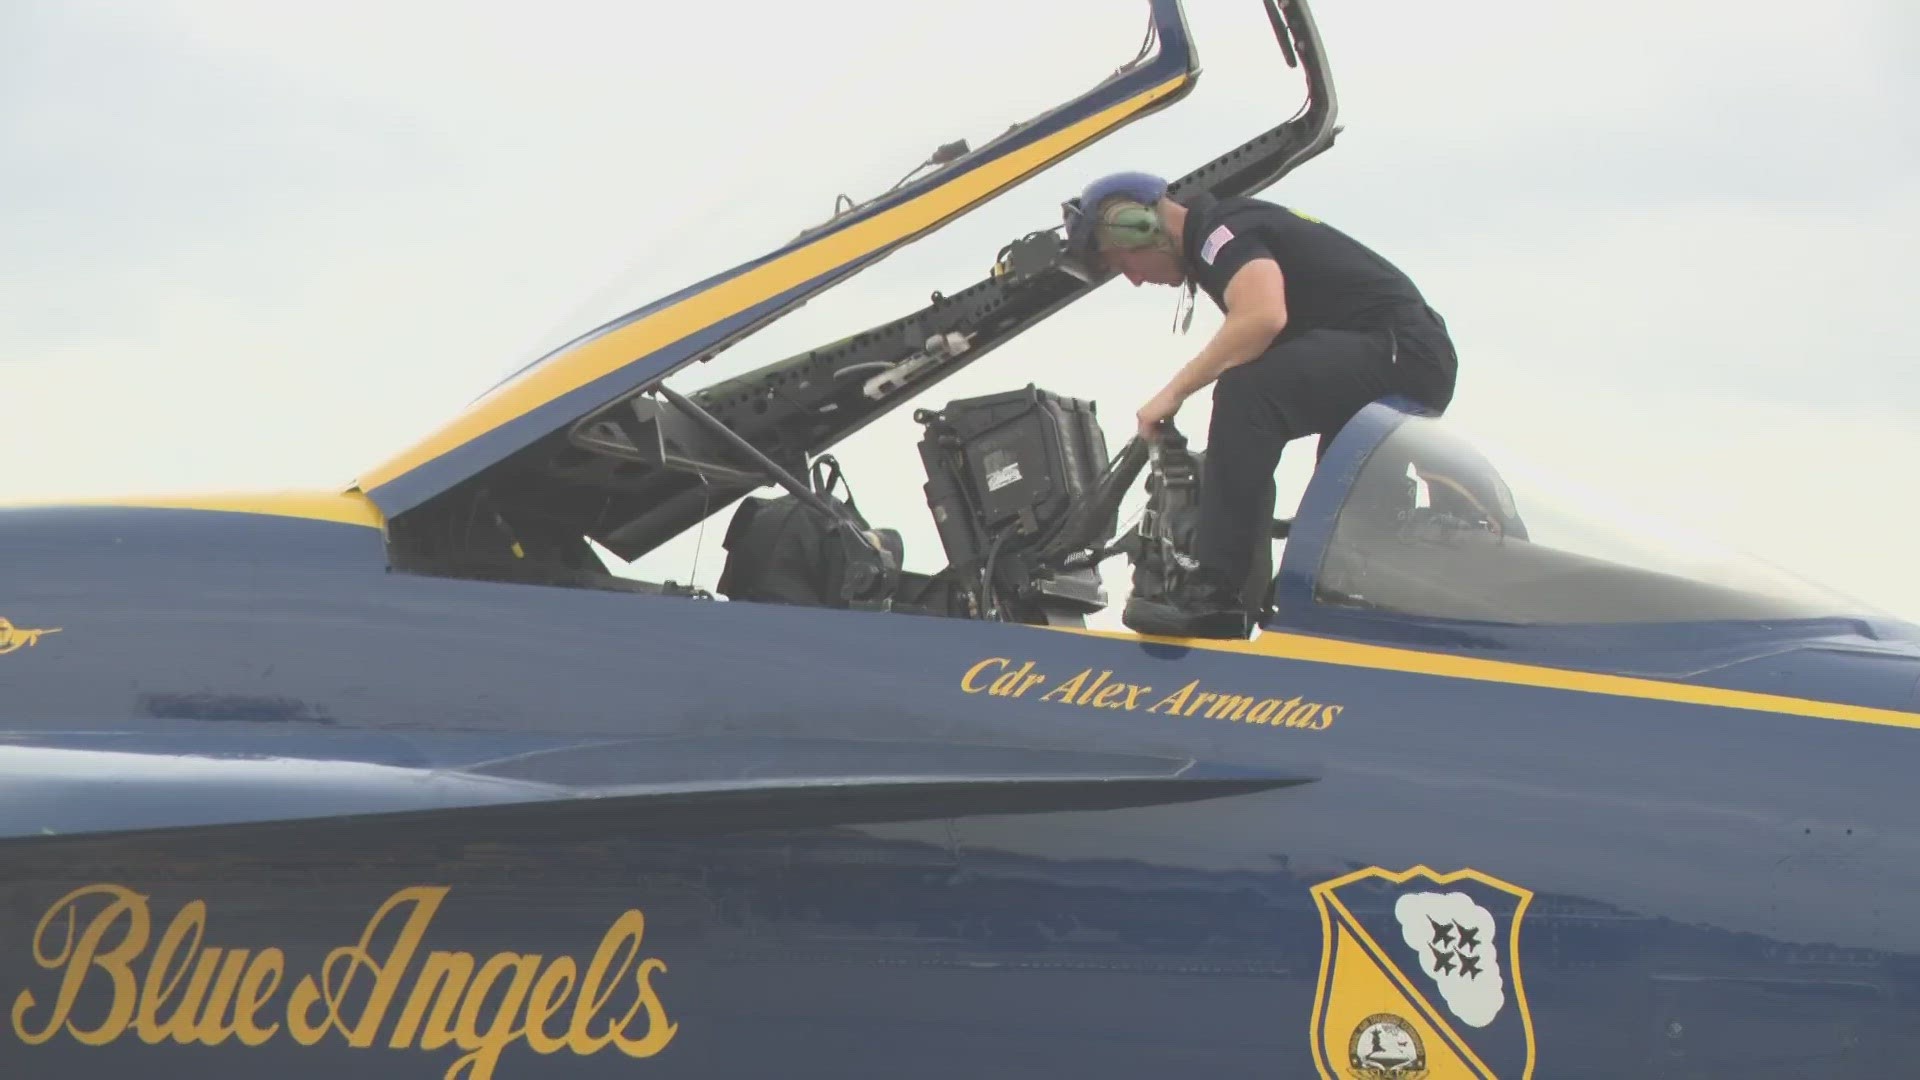 The Blue Angels will now perform at noon Sunday instead of 3 p.m. On Saturday, the Blue Angels were in the air for 10 minutes before lightning canceled the show.